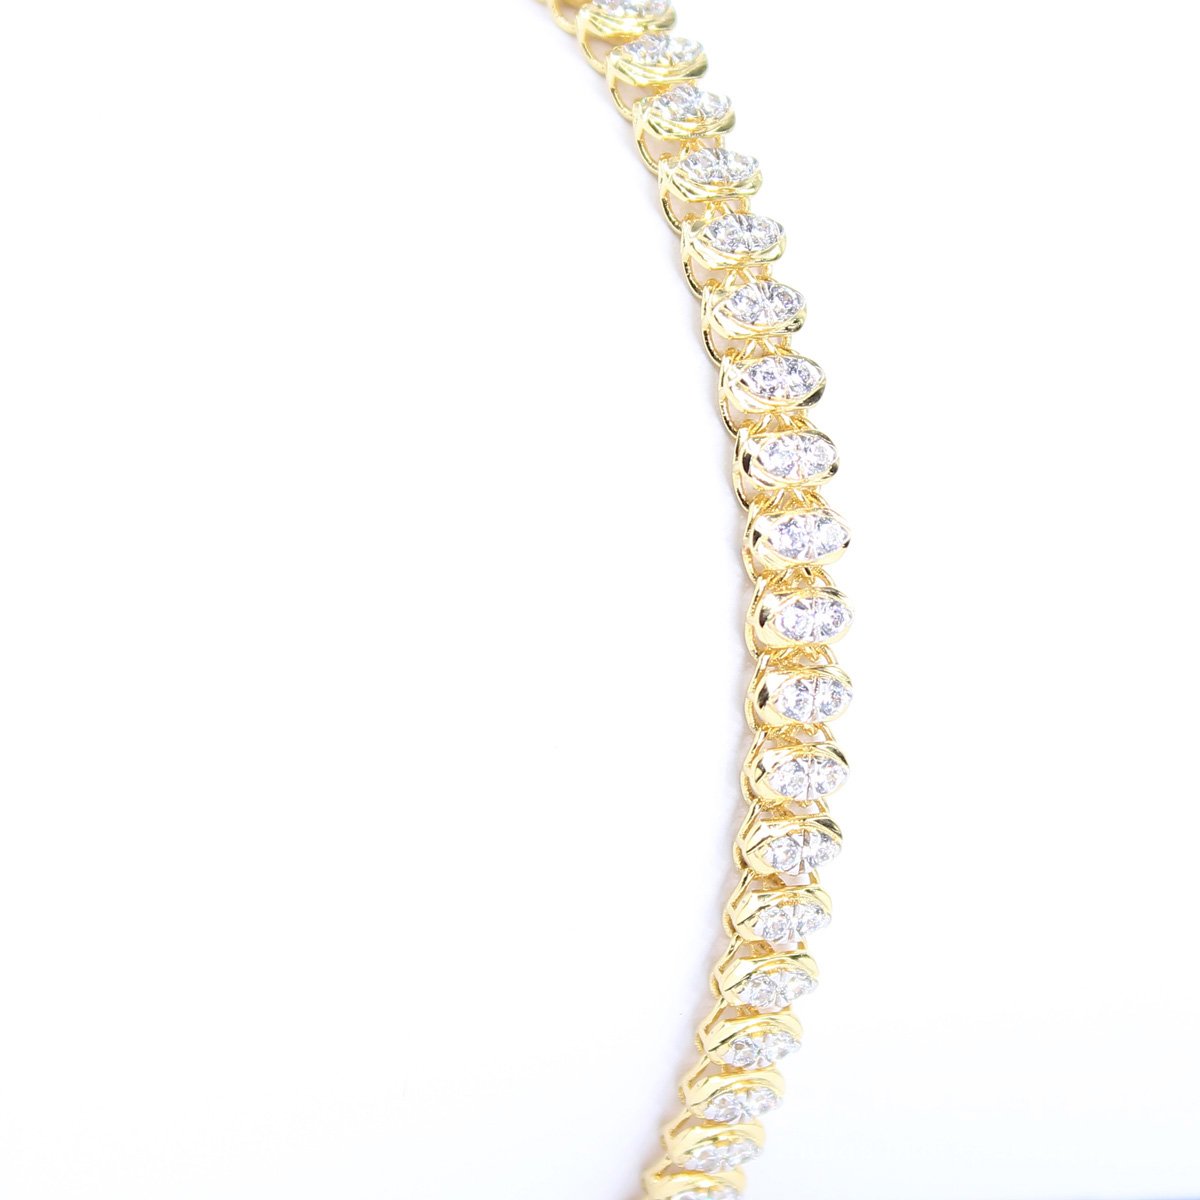 3.12 Carat Lab Grown Diamond Stylish 18k Yellow Gold Bracelets For Woman -  Ajretail Your One-Stop Destination for Lab Grown Diamonds, Gemstones, and  Jewelry Wholesale and Export